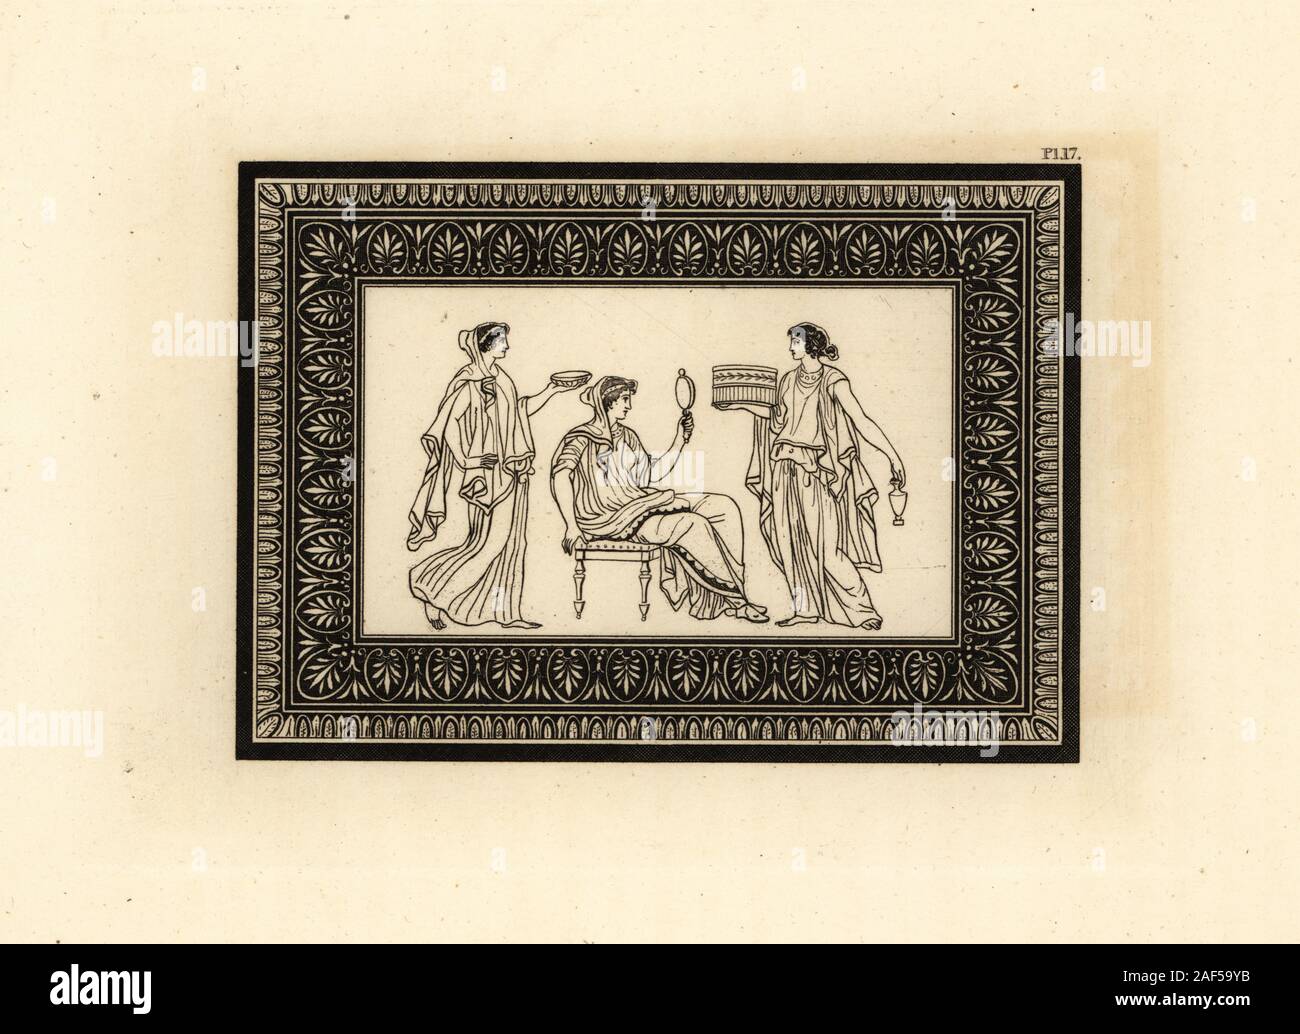 Roman goddess Ceres, seated on a stool, holding a mirror, attended by priestesses carrying a patera (bowl), praefericulum (vase) and cystus. Within a rectangular black border decorated with leaves. Copperplate engraving by Thomas Kirk (1765-1797)  from Sir William Hamilton’s Outlines from the Figures and Compositions upon the Greek, Roman and Etruscan Vases of the Late Sir Hamilton, T. M’Lean, London, 1834. Stock Photo